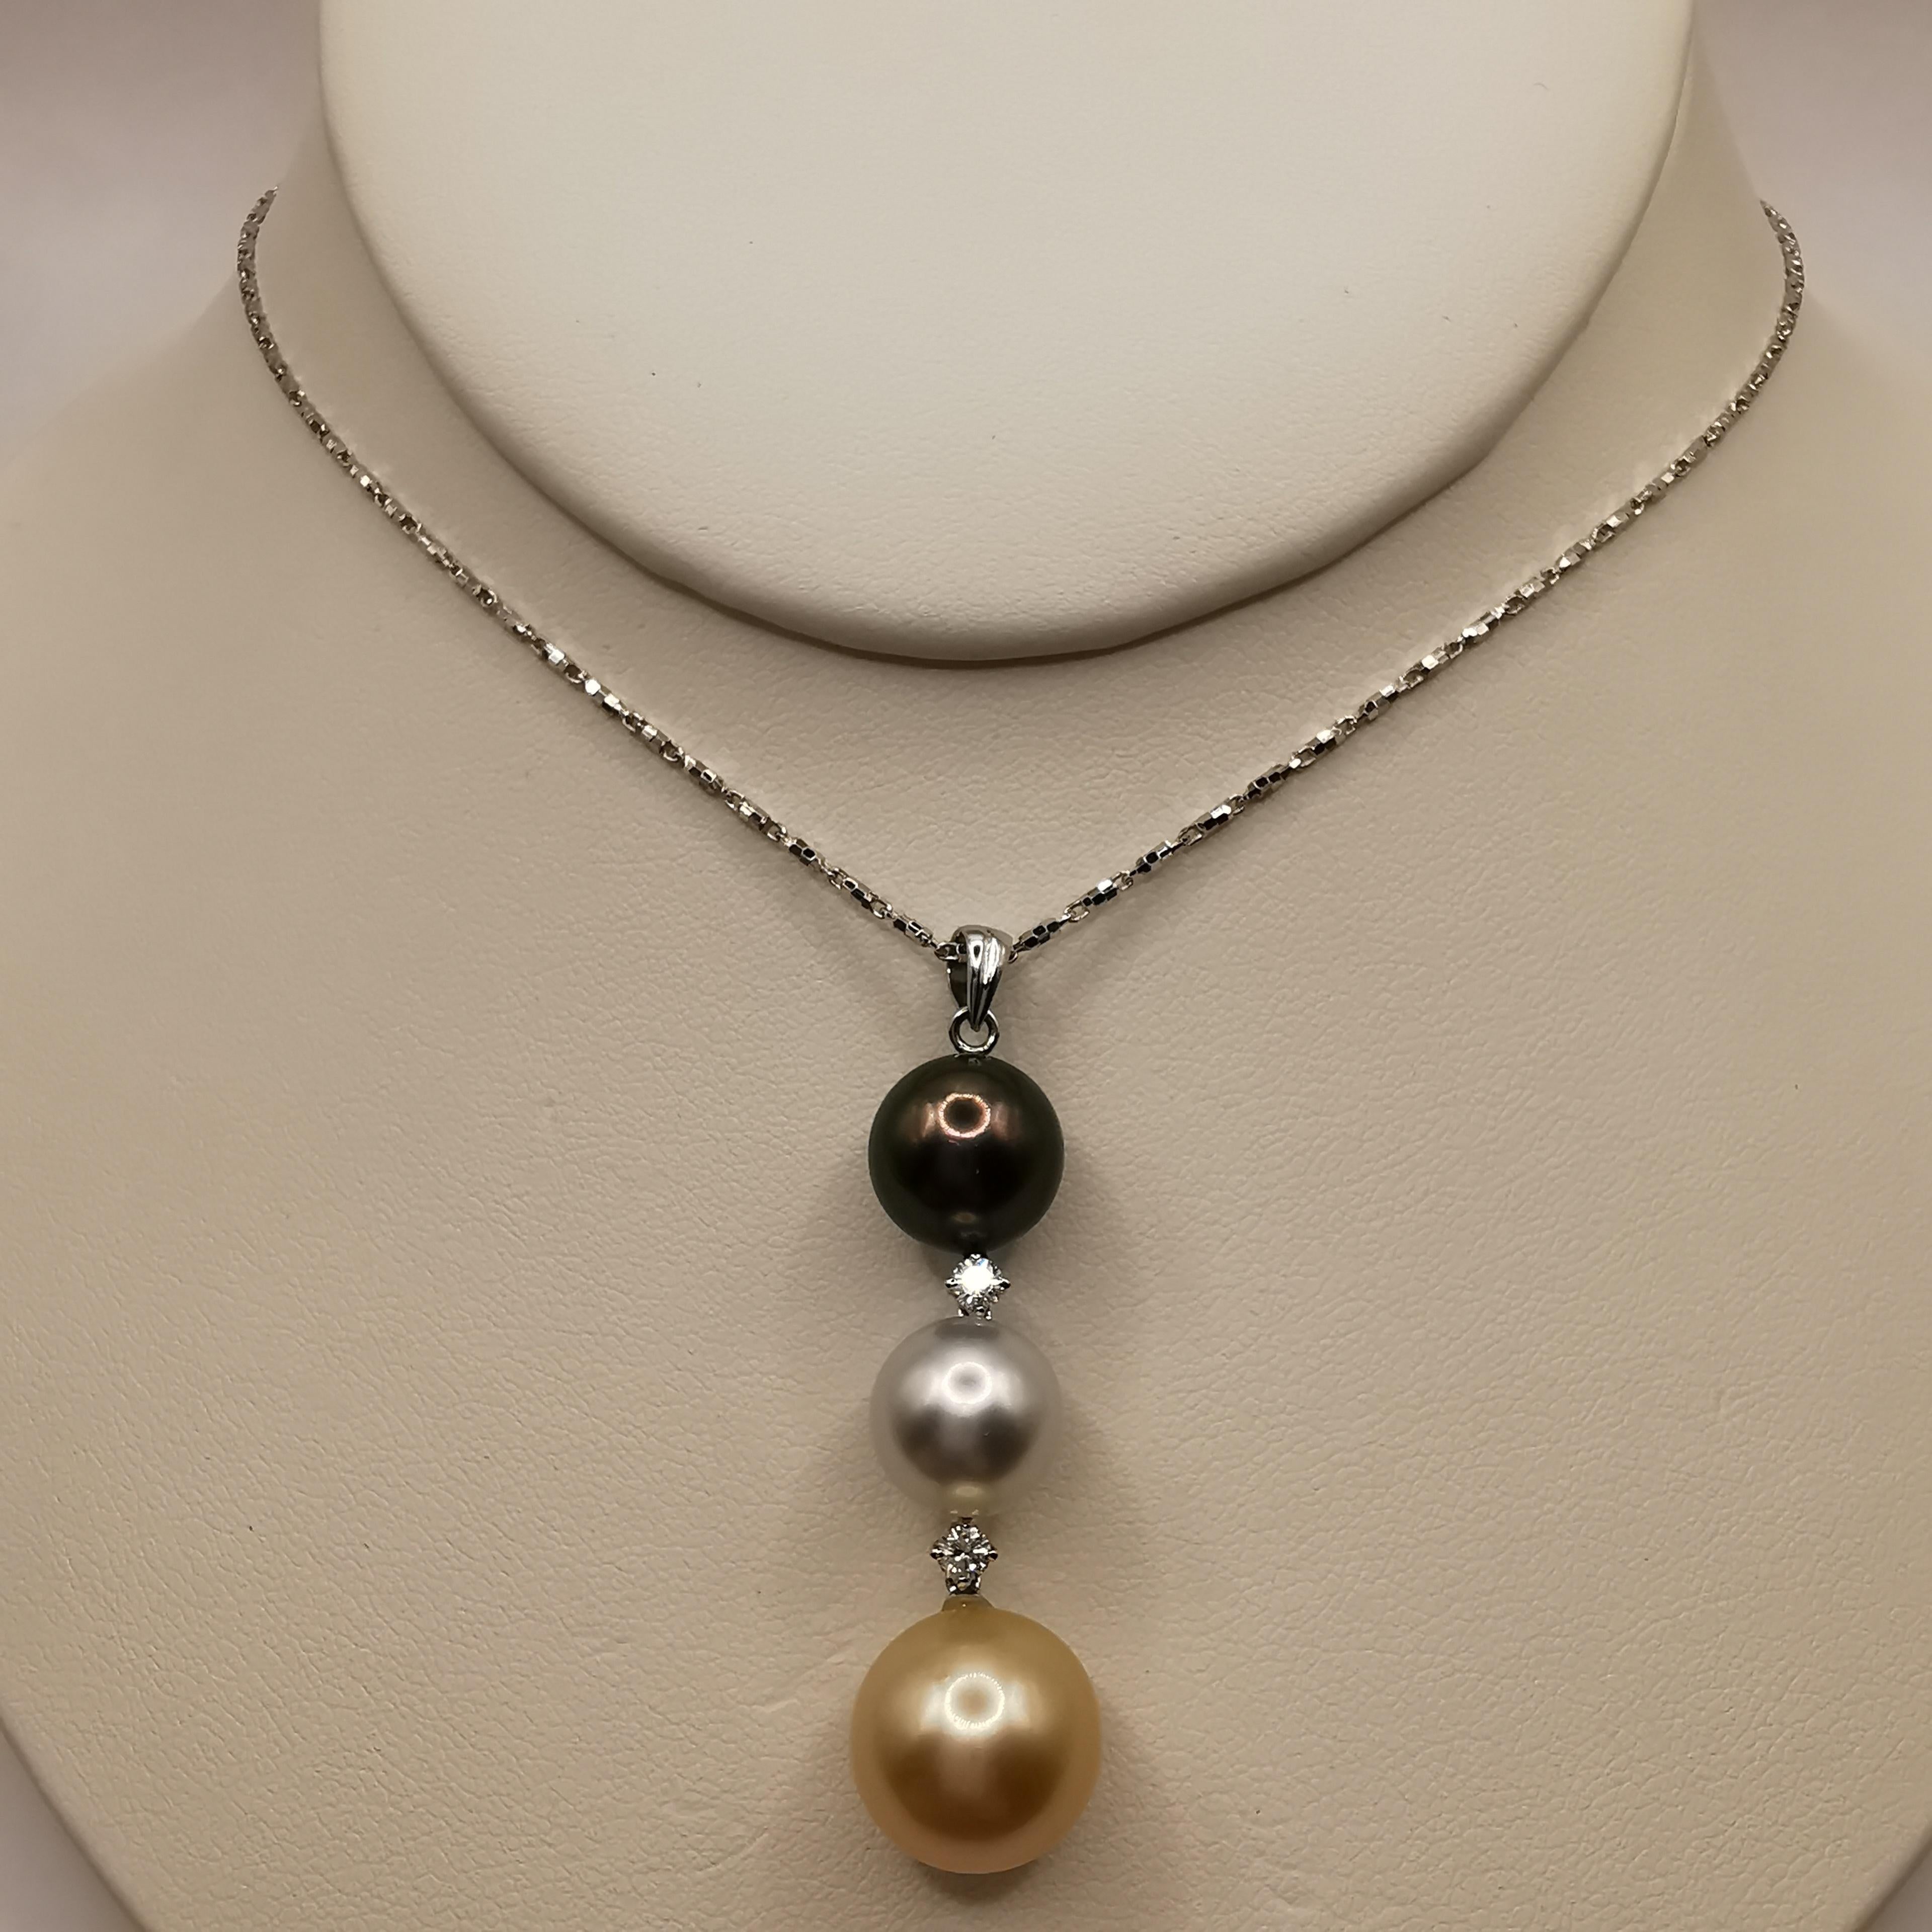 This stunning pendant necklace is the perfect choice for adding a touch of sophistication and glamour to your look. The necklace features a black, white, and gold three pearl design set with diamonds, giving it a sparkling and eye-catching finish.